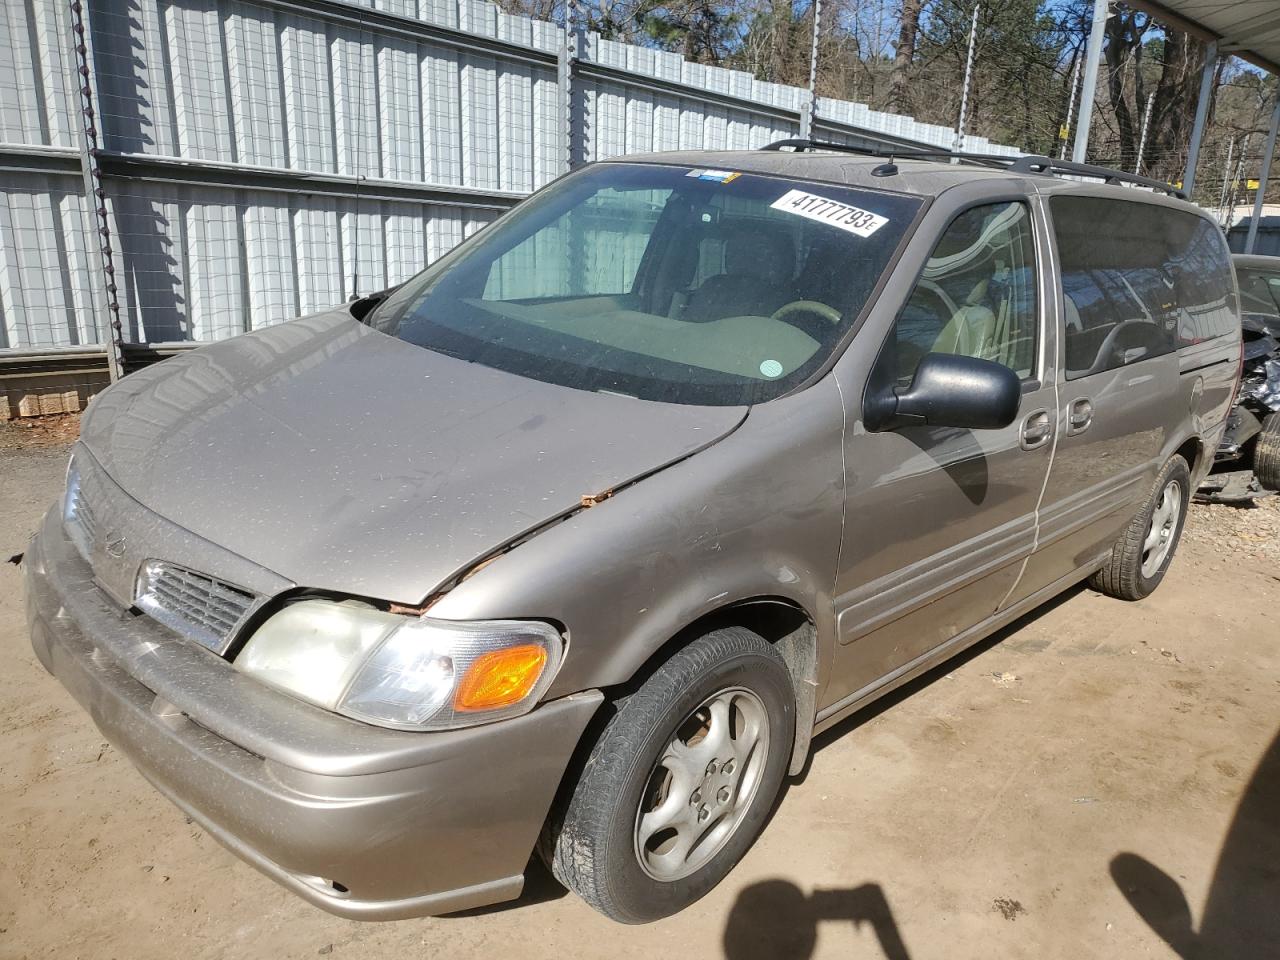 2002 Oldsmobile Silhouette for sale at Copart Austell, GA Lot #41777*** |  SalvageReseller.com